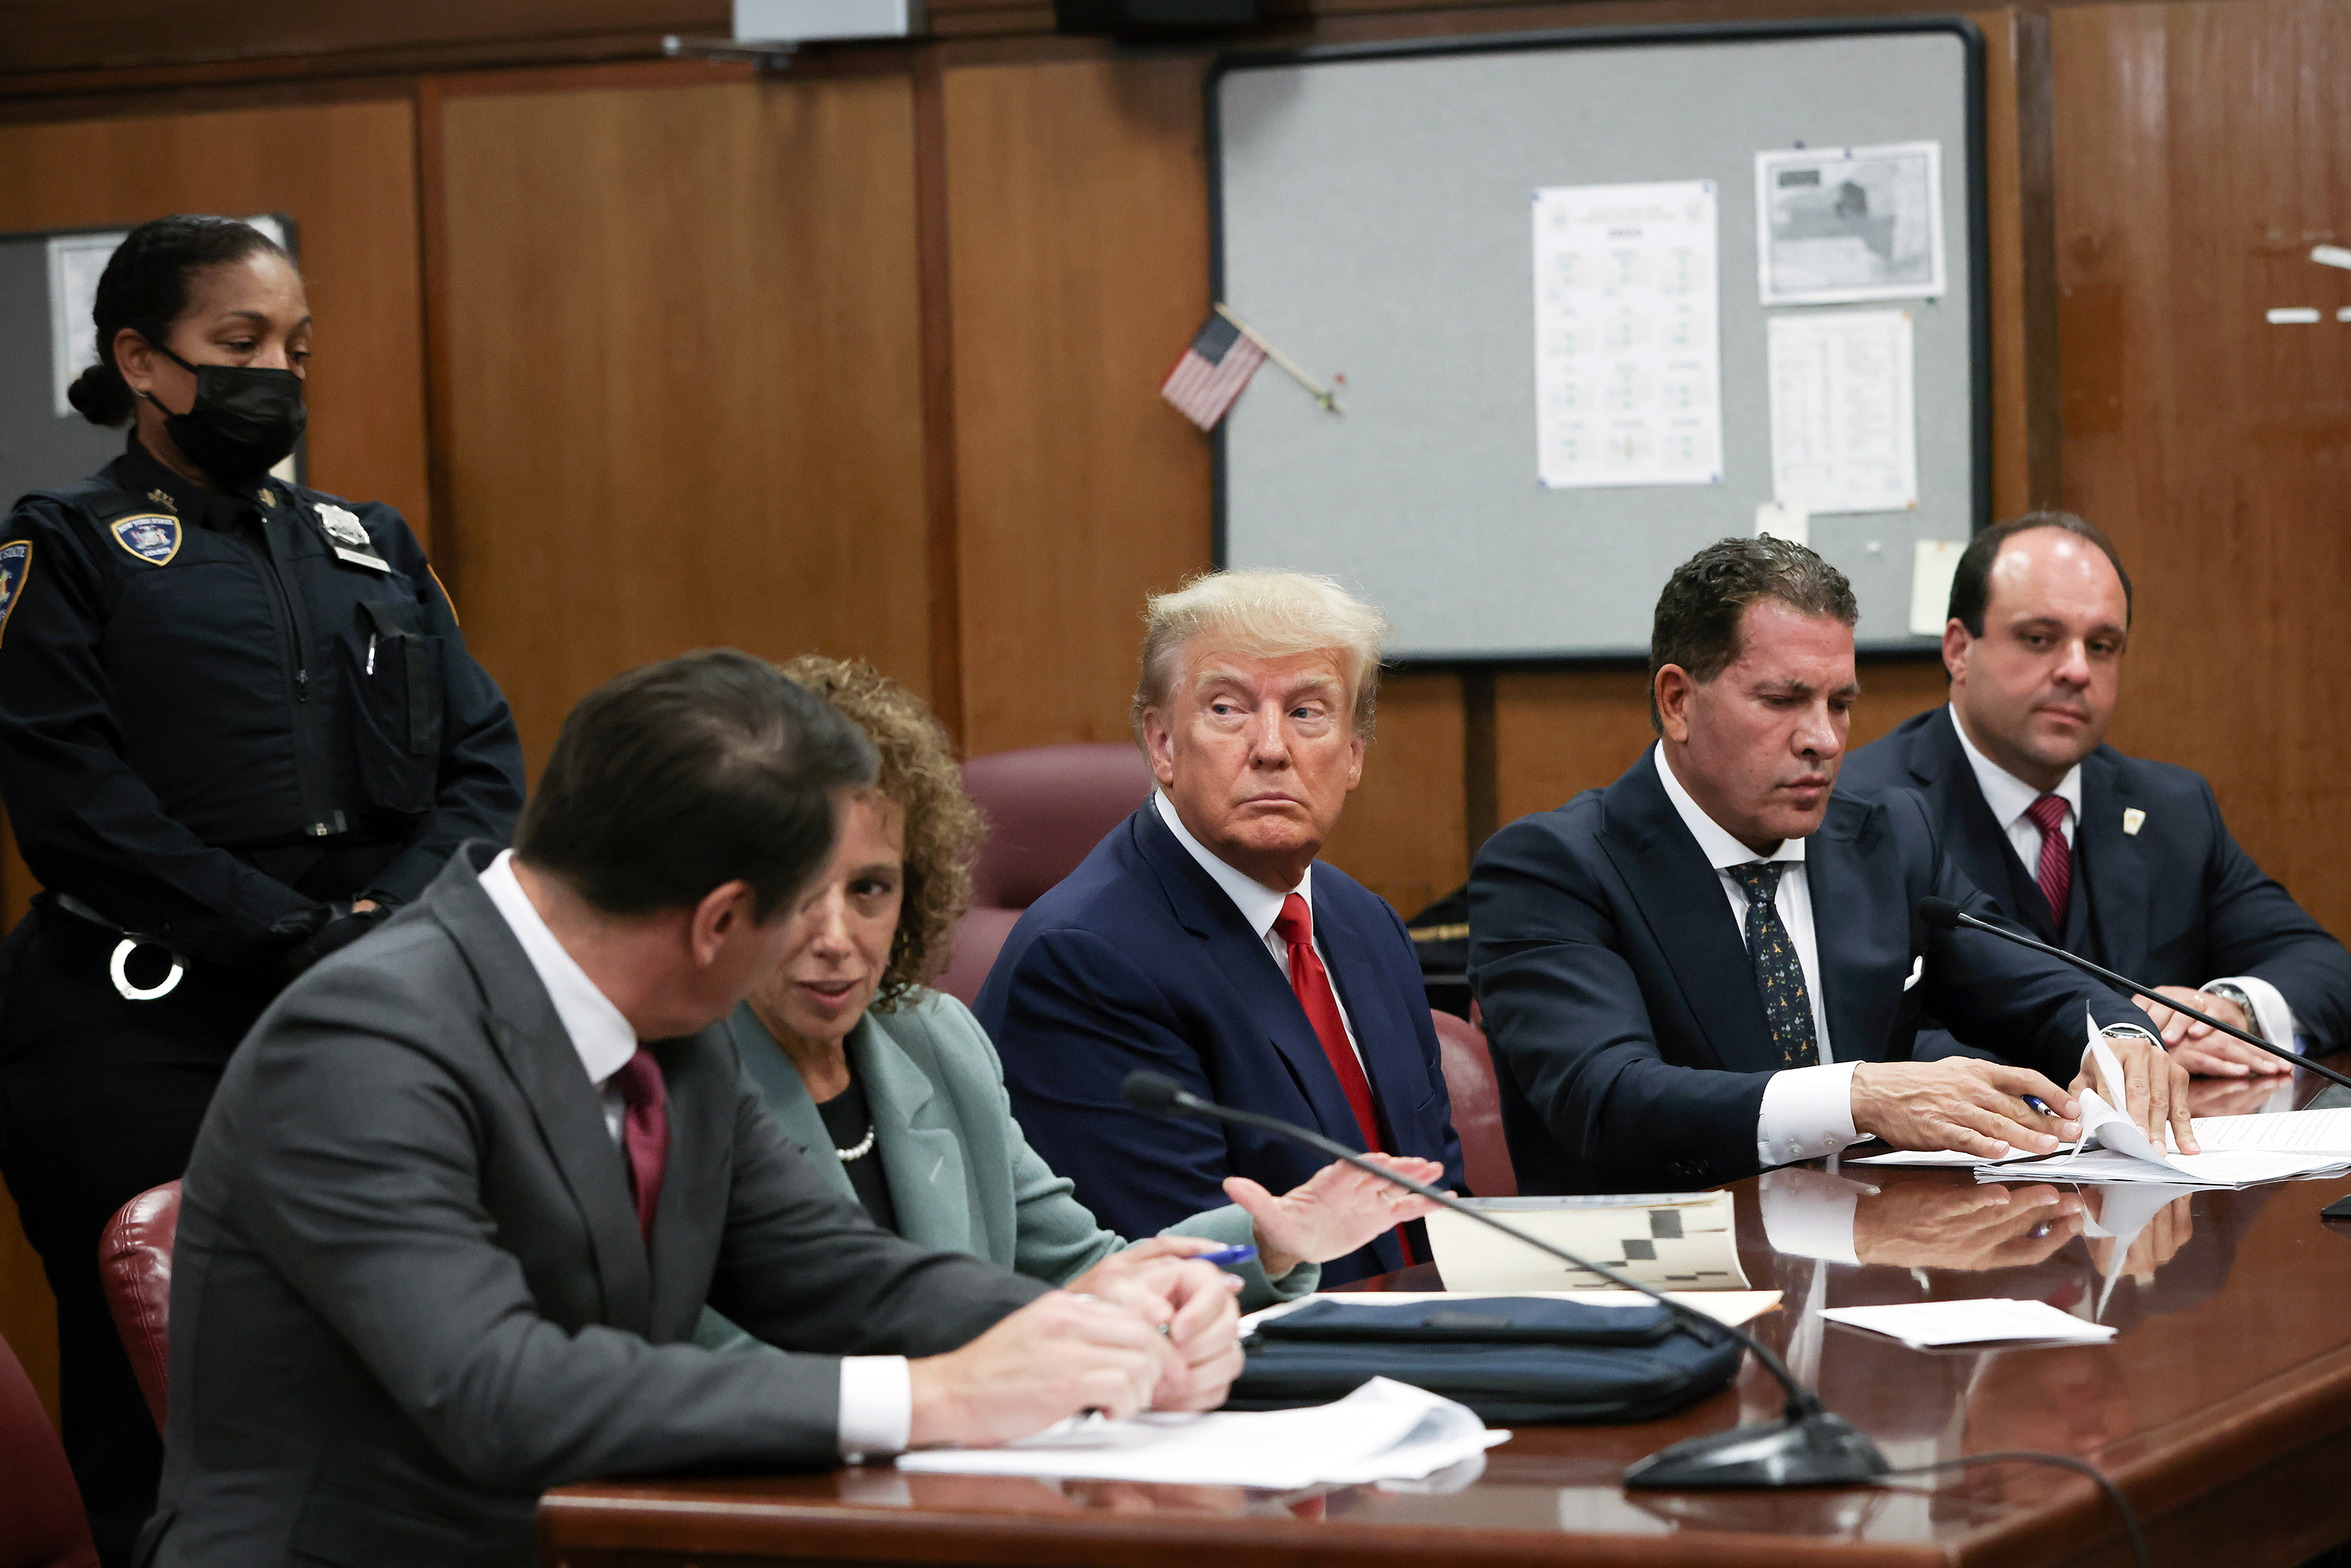 Former President Donald Trump sits in the courtroom with his attorneys Todd Blanche, Susan Necheles, Joe Tacopina and Boris Epshteyn during his arraignment at the Manhattan Criminal Court on April 4 in New York.